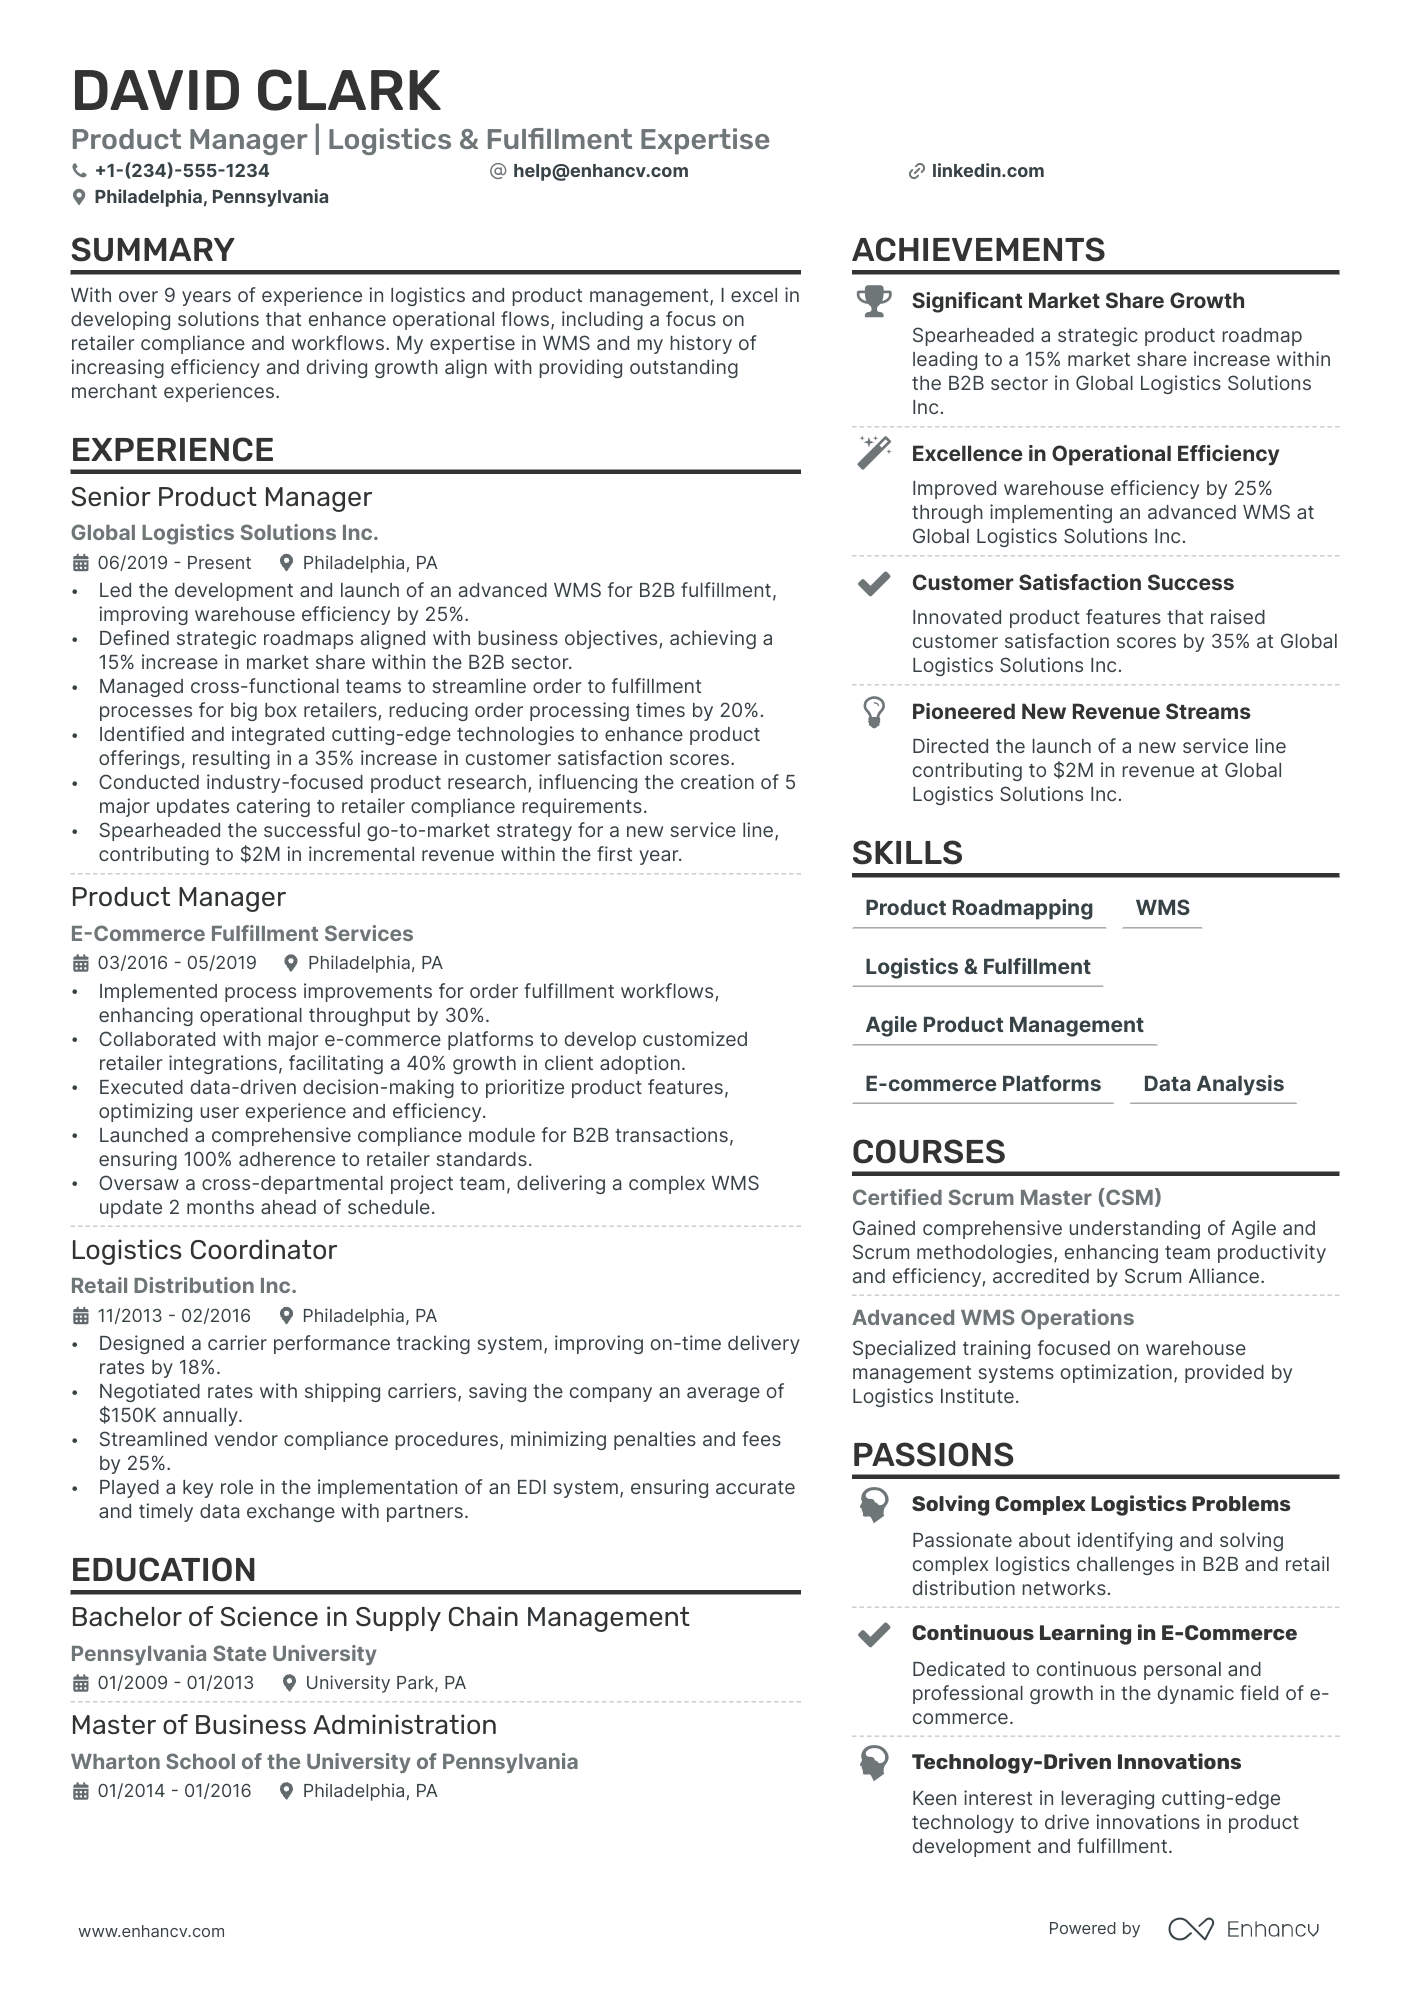 B2B Product Manager resume example